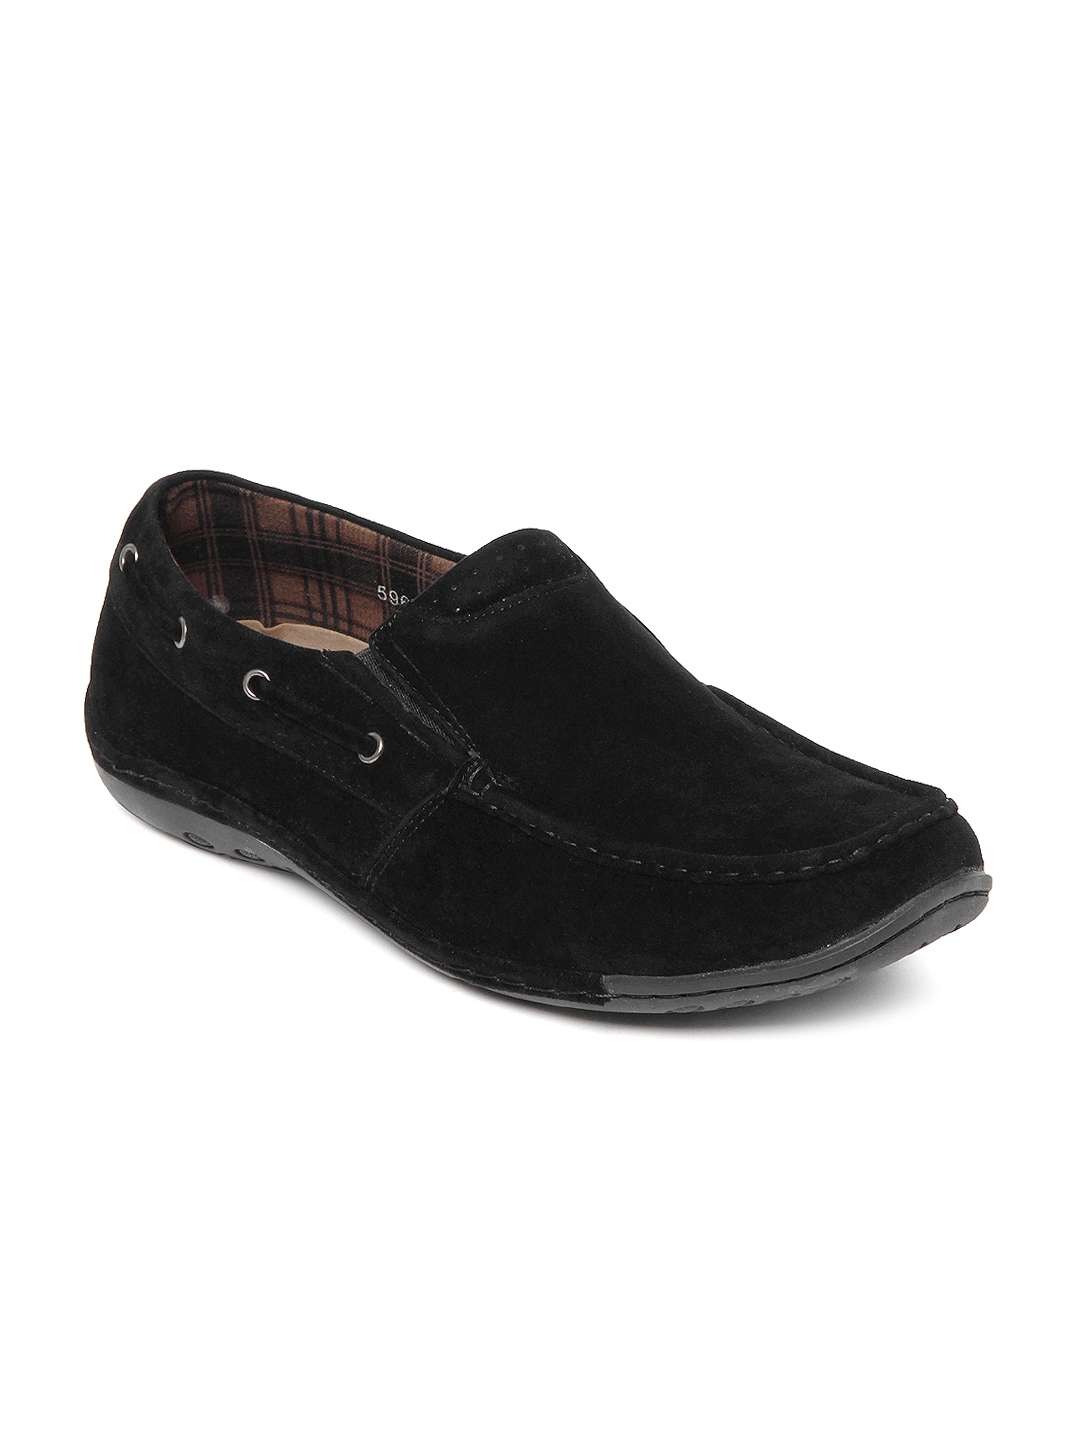 Buy Maco Men Black Loafers - Casual Shoes for Men 231244 | Myntra